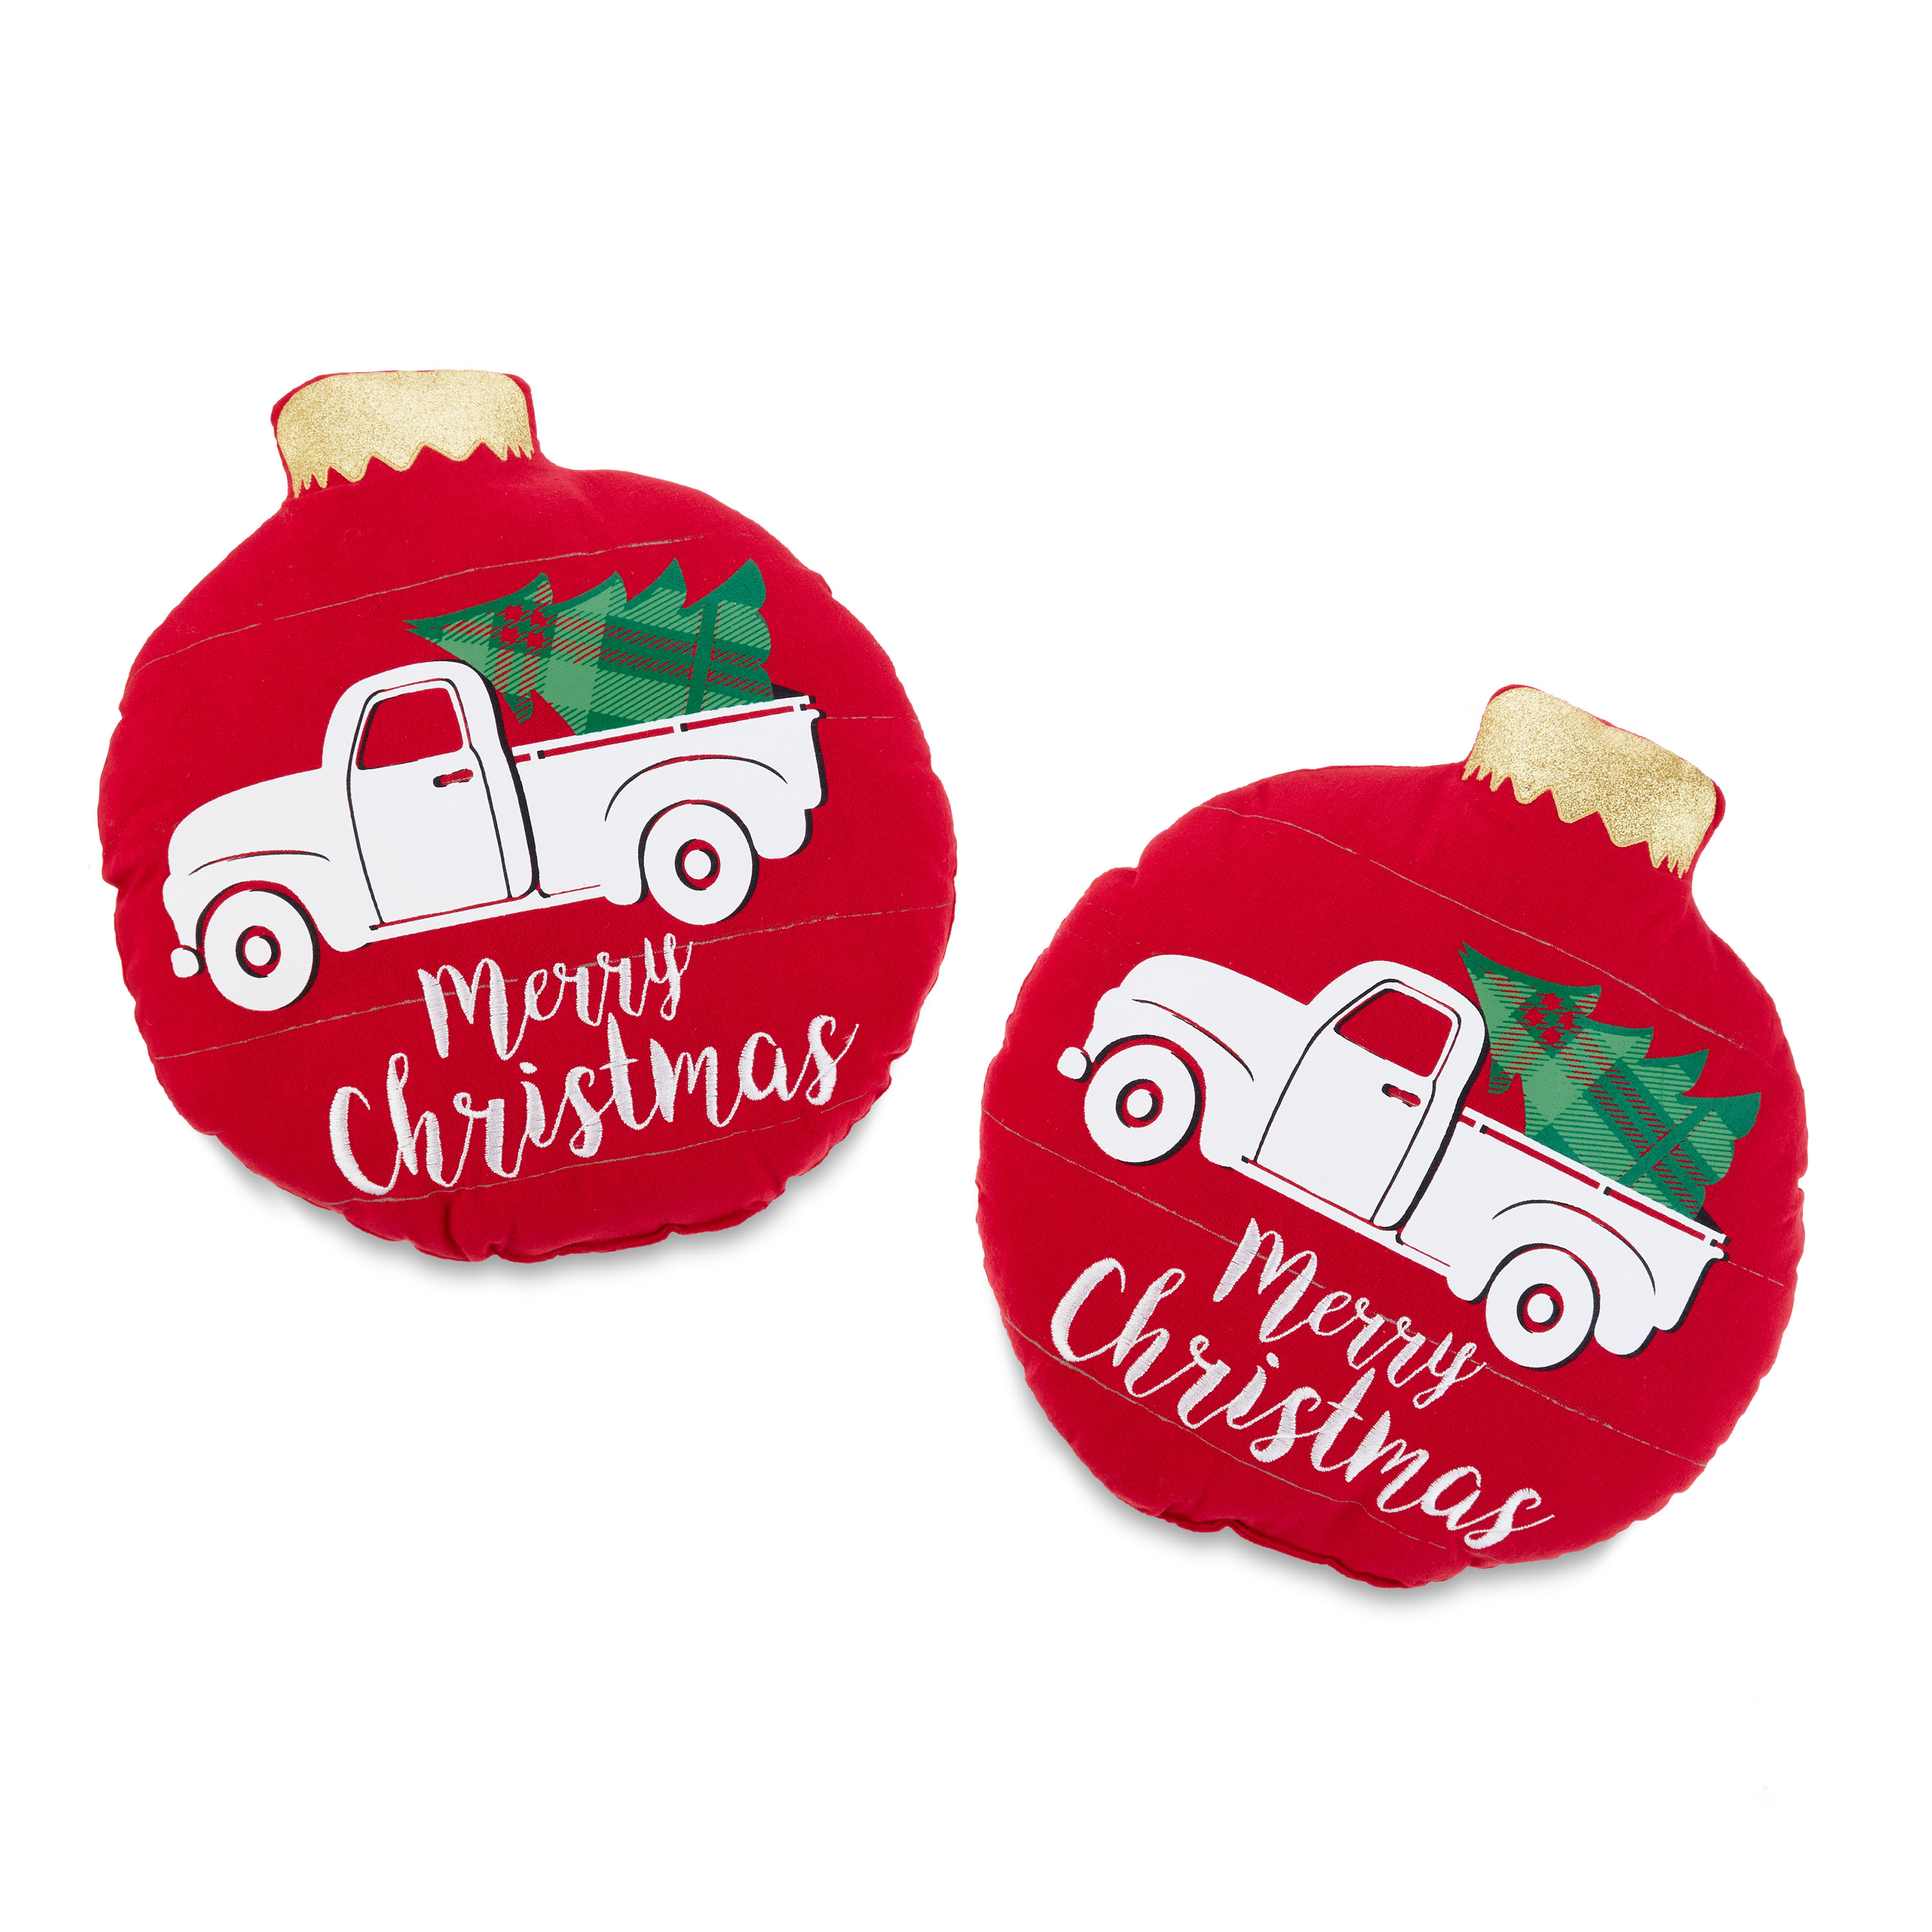 Holiday Time Christmas 13 inch Red Ornament Decorative Pillows Plush, 2-pack - image 1 of 6